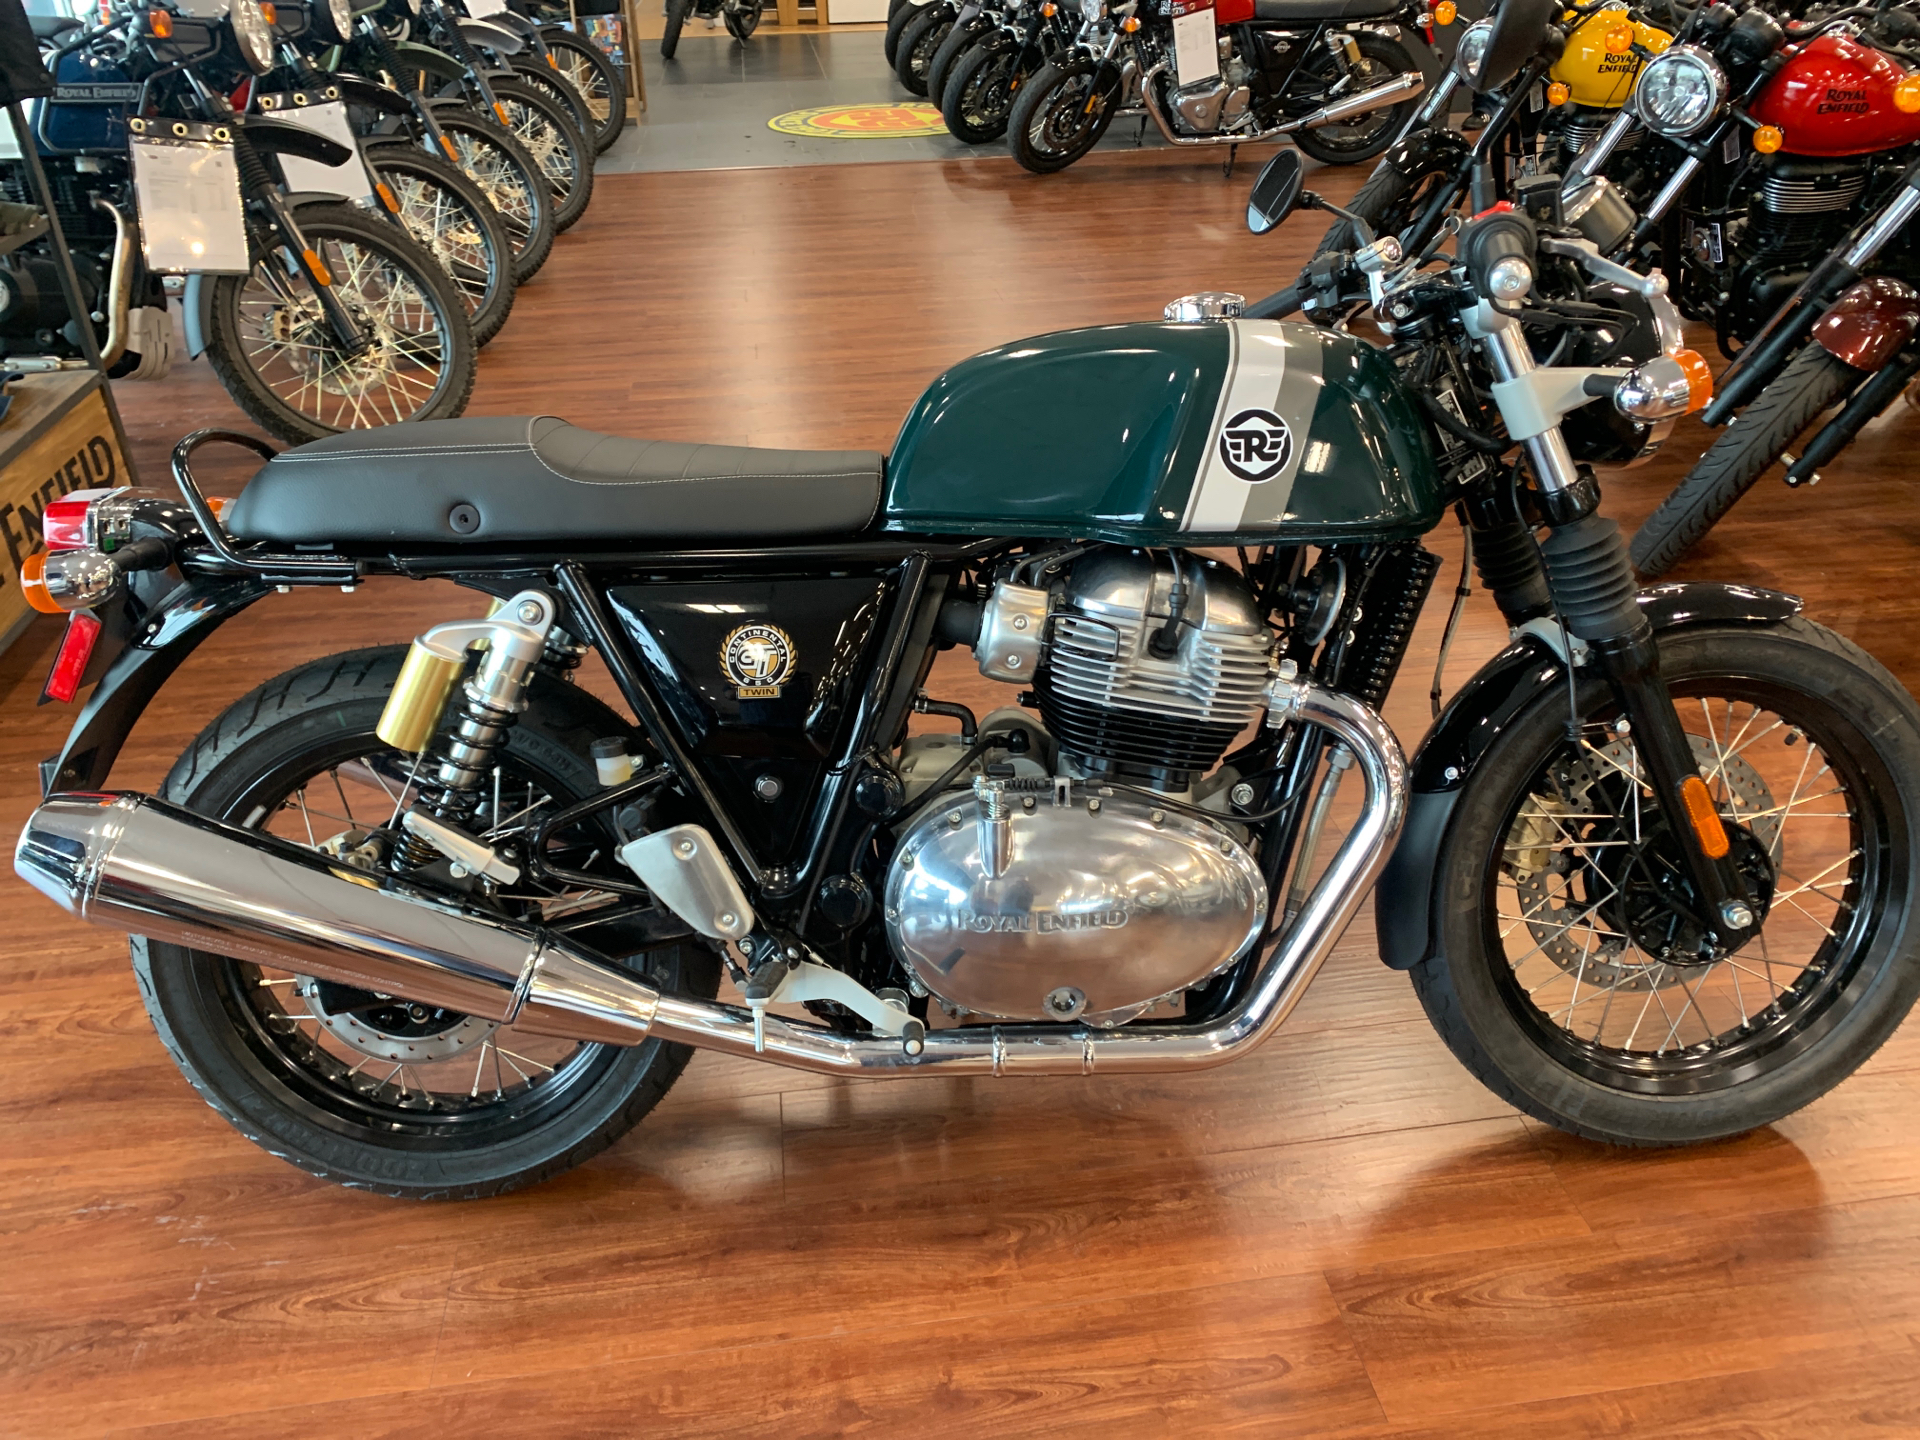 2022 Royal Enfield Continental GT 650 in De Pere, Wisconsin - Photo 1